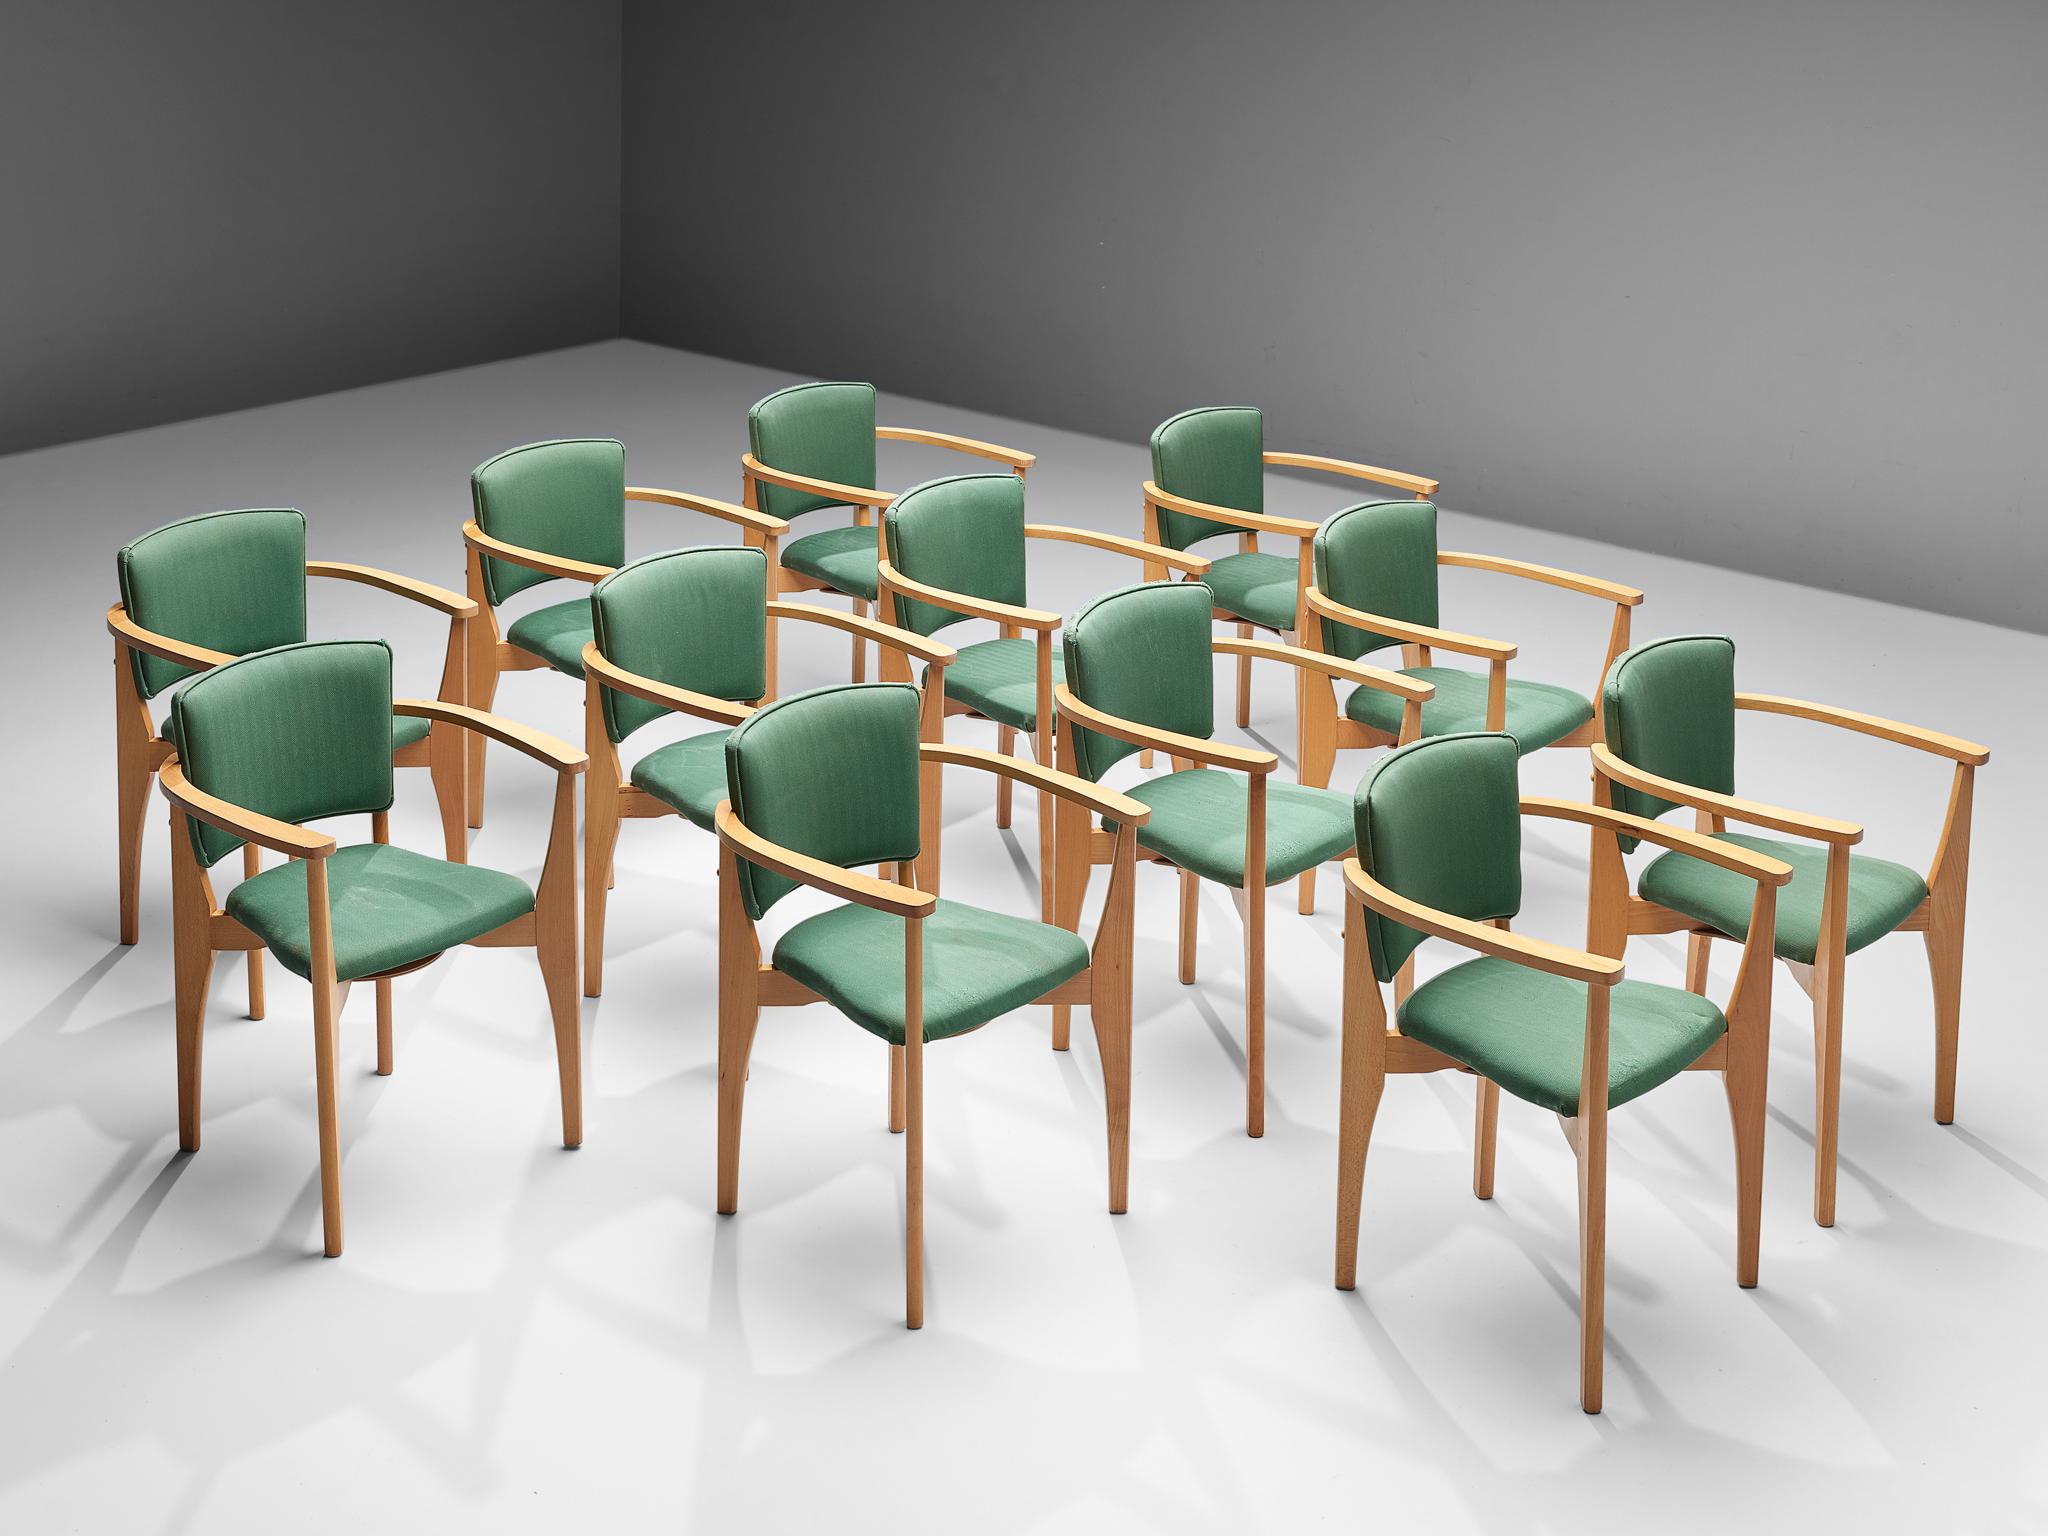 Set of twelve dining chairs, beech, fabric, Europe, 1960s

Set of twelve dining chairs, made in Europe in the 1960s. These dining chairs feature frames in a light beech wood. They show rounded armrests that are connected to the legs in front and at